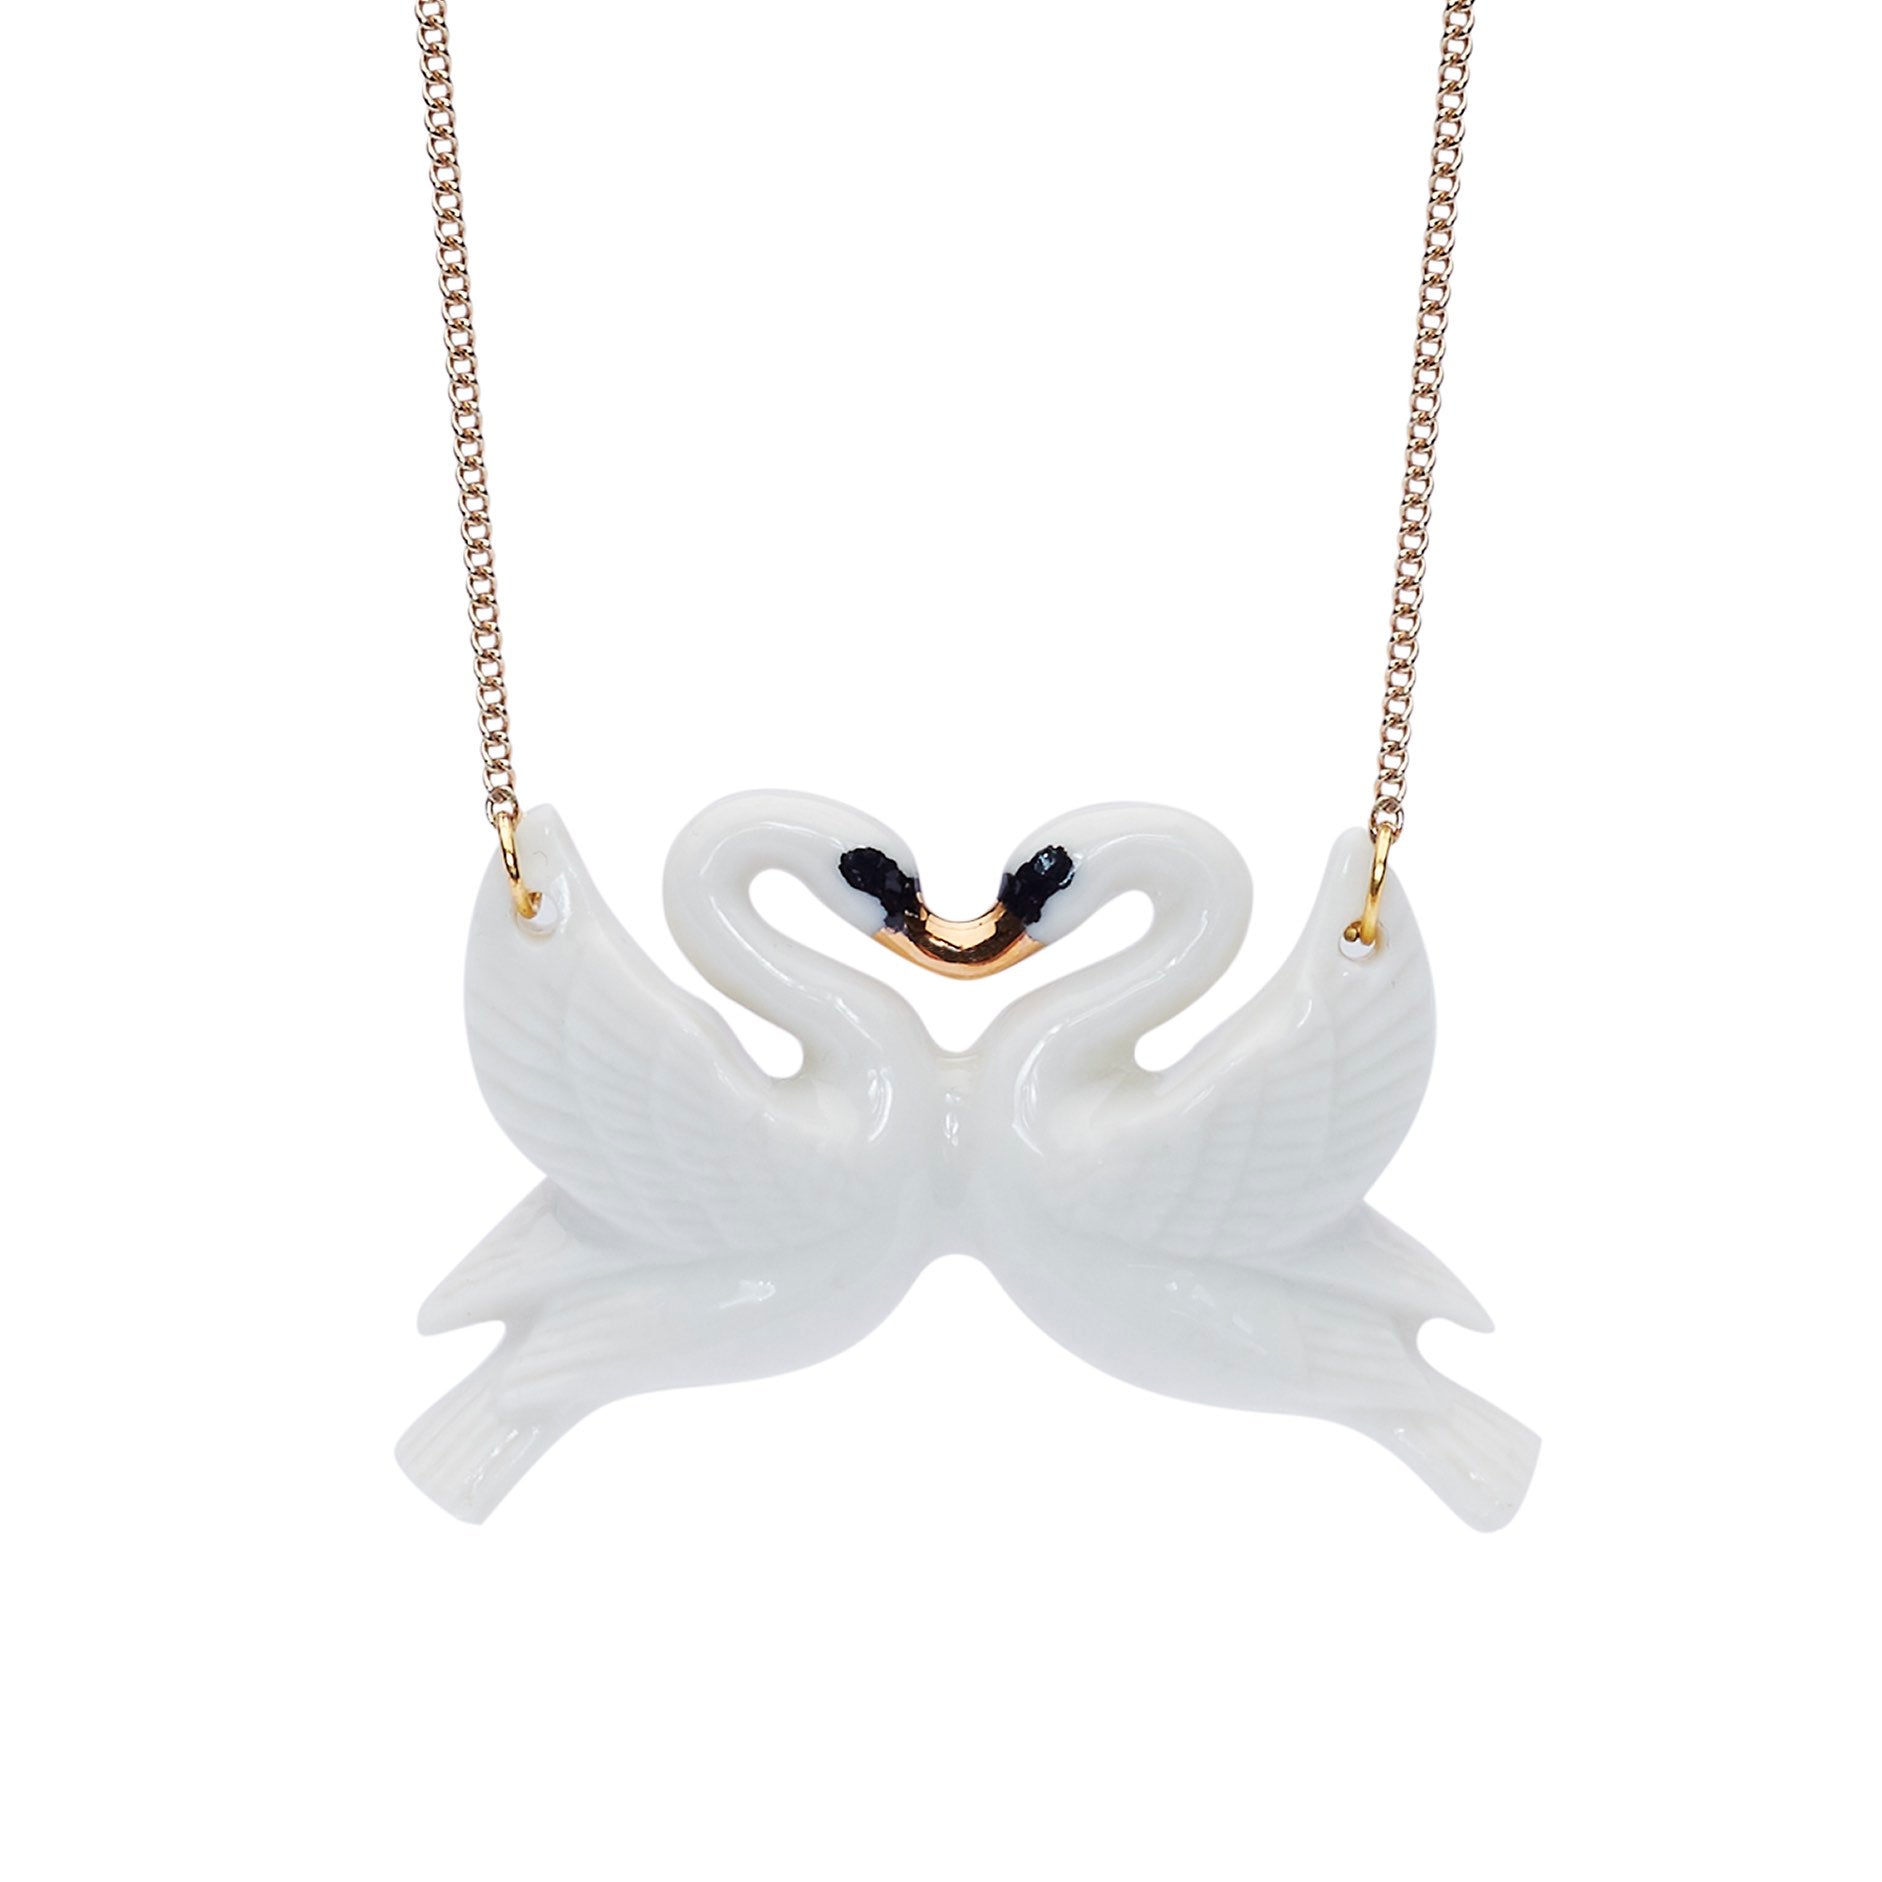 White and Gold Kissing Swans Necklace